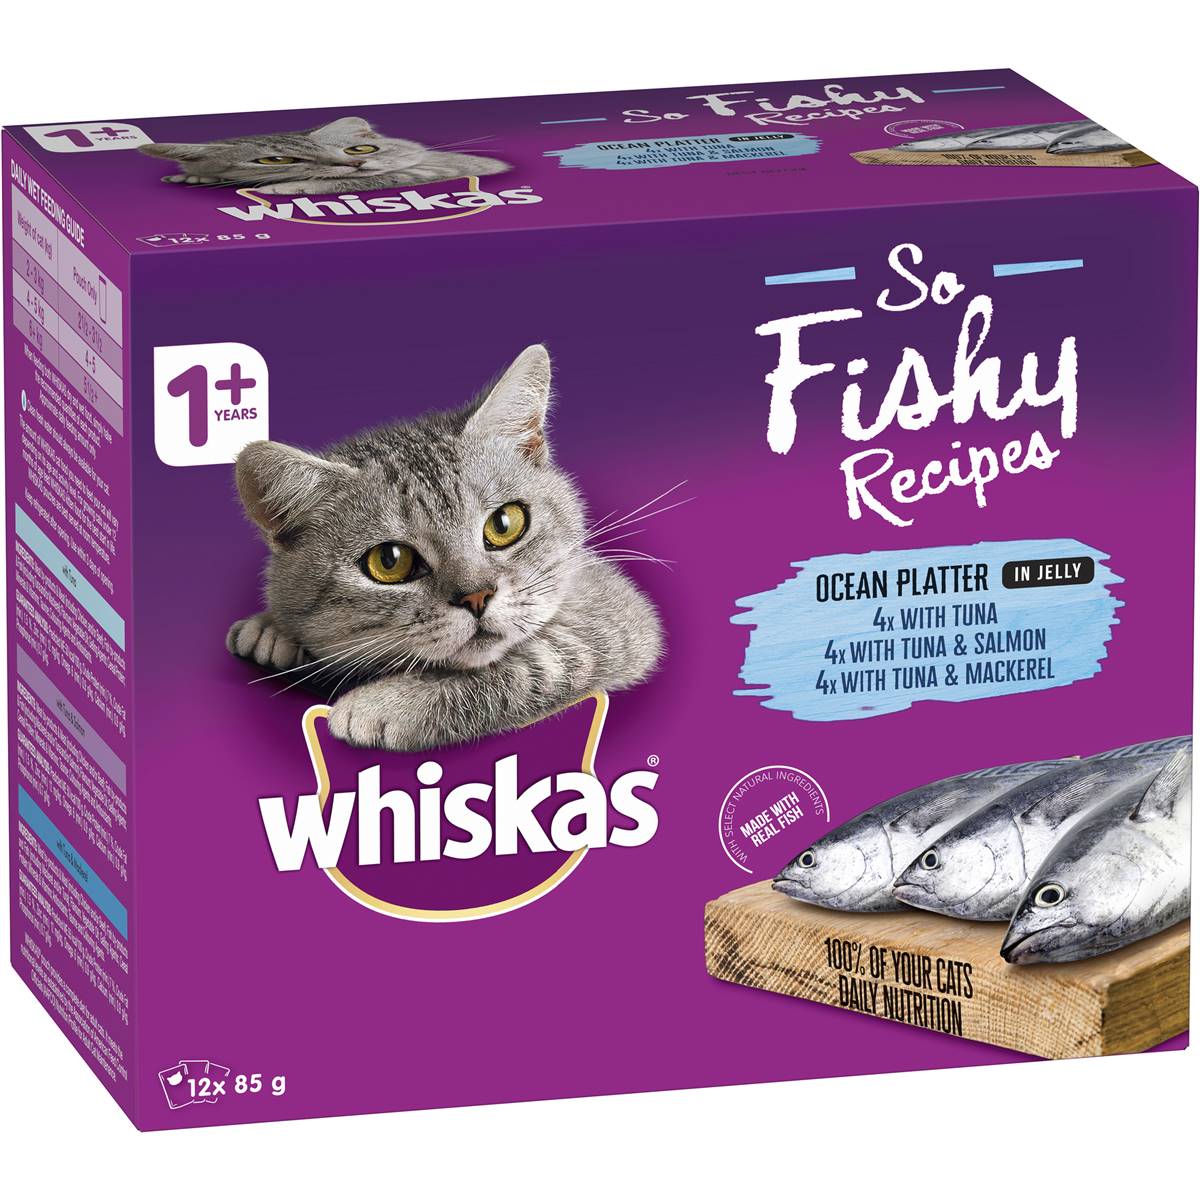 Whiskas 1+ Years Oh So Fishy Ocean Platter In Jelly 12x85g